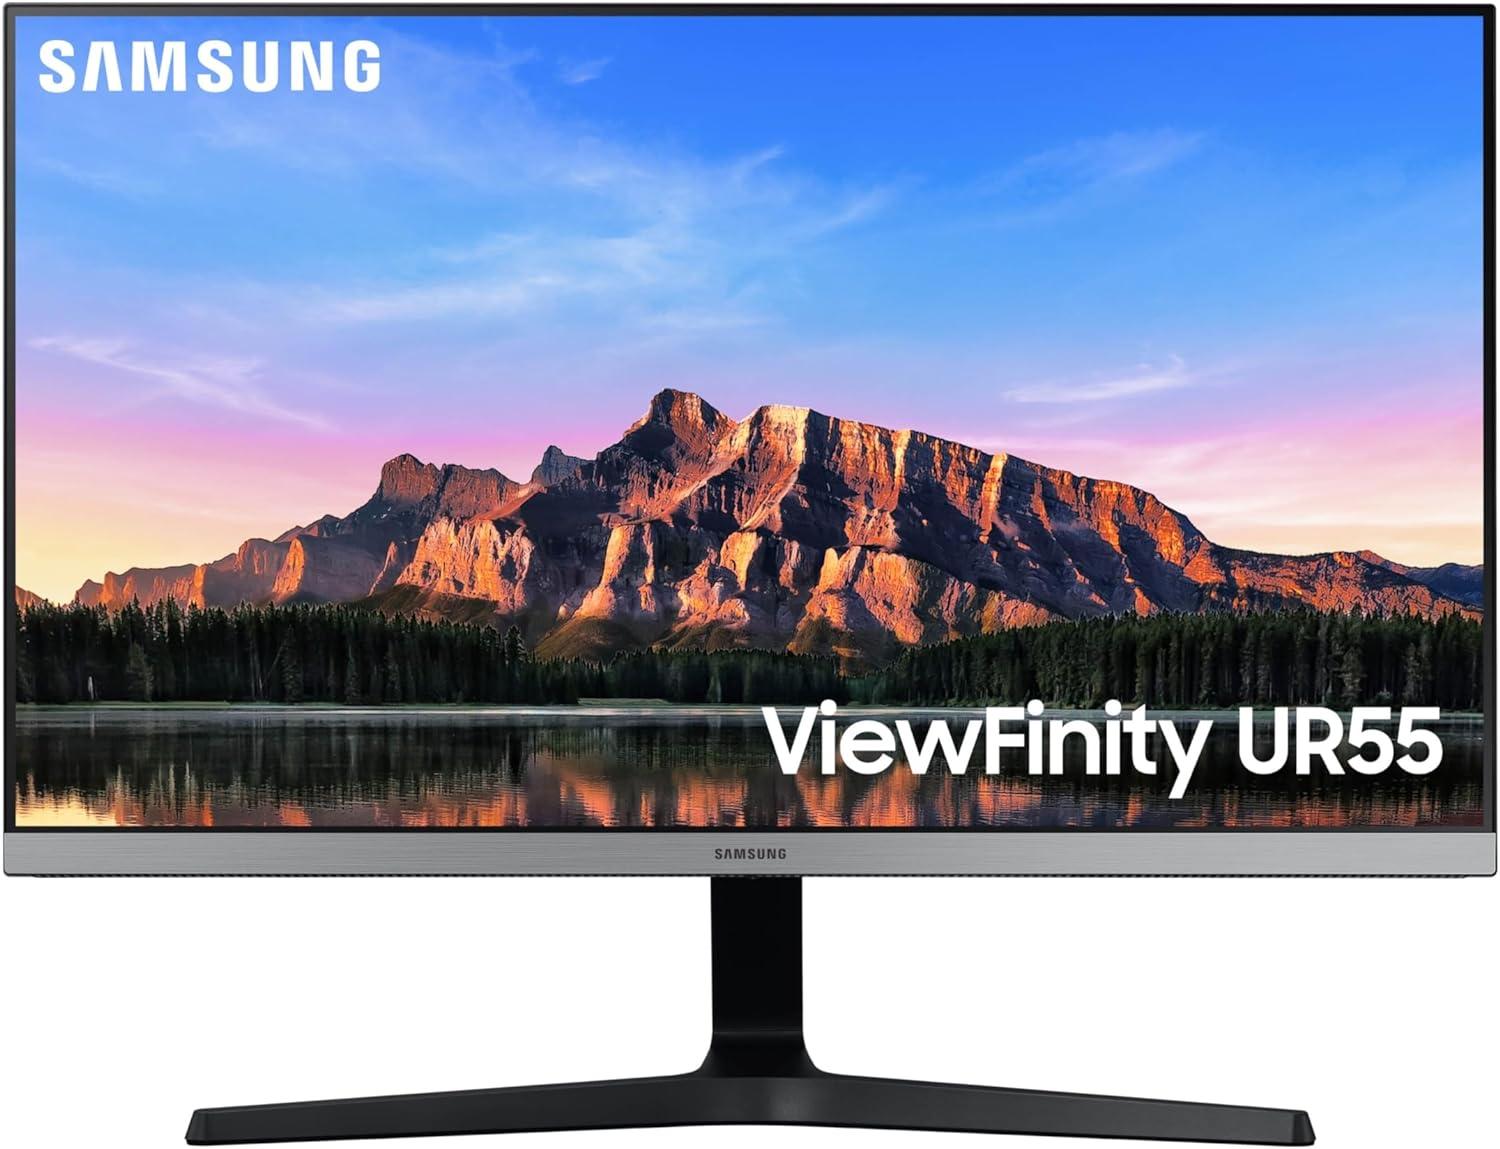 28in Samsung ViewFinity UR55 60Hz UHD IPS Monitor for $199.99 Shipped